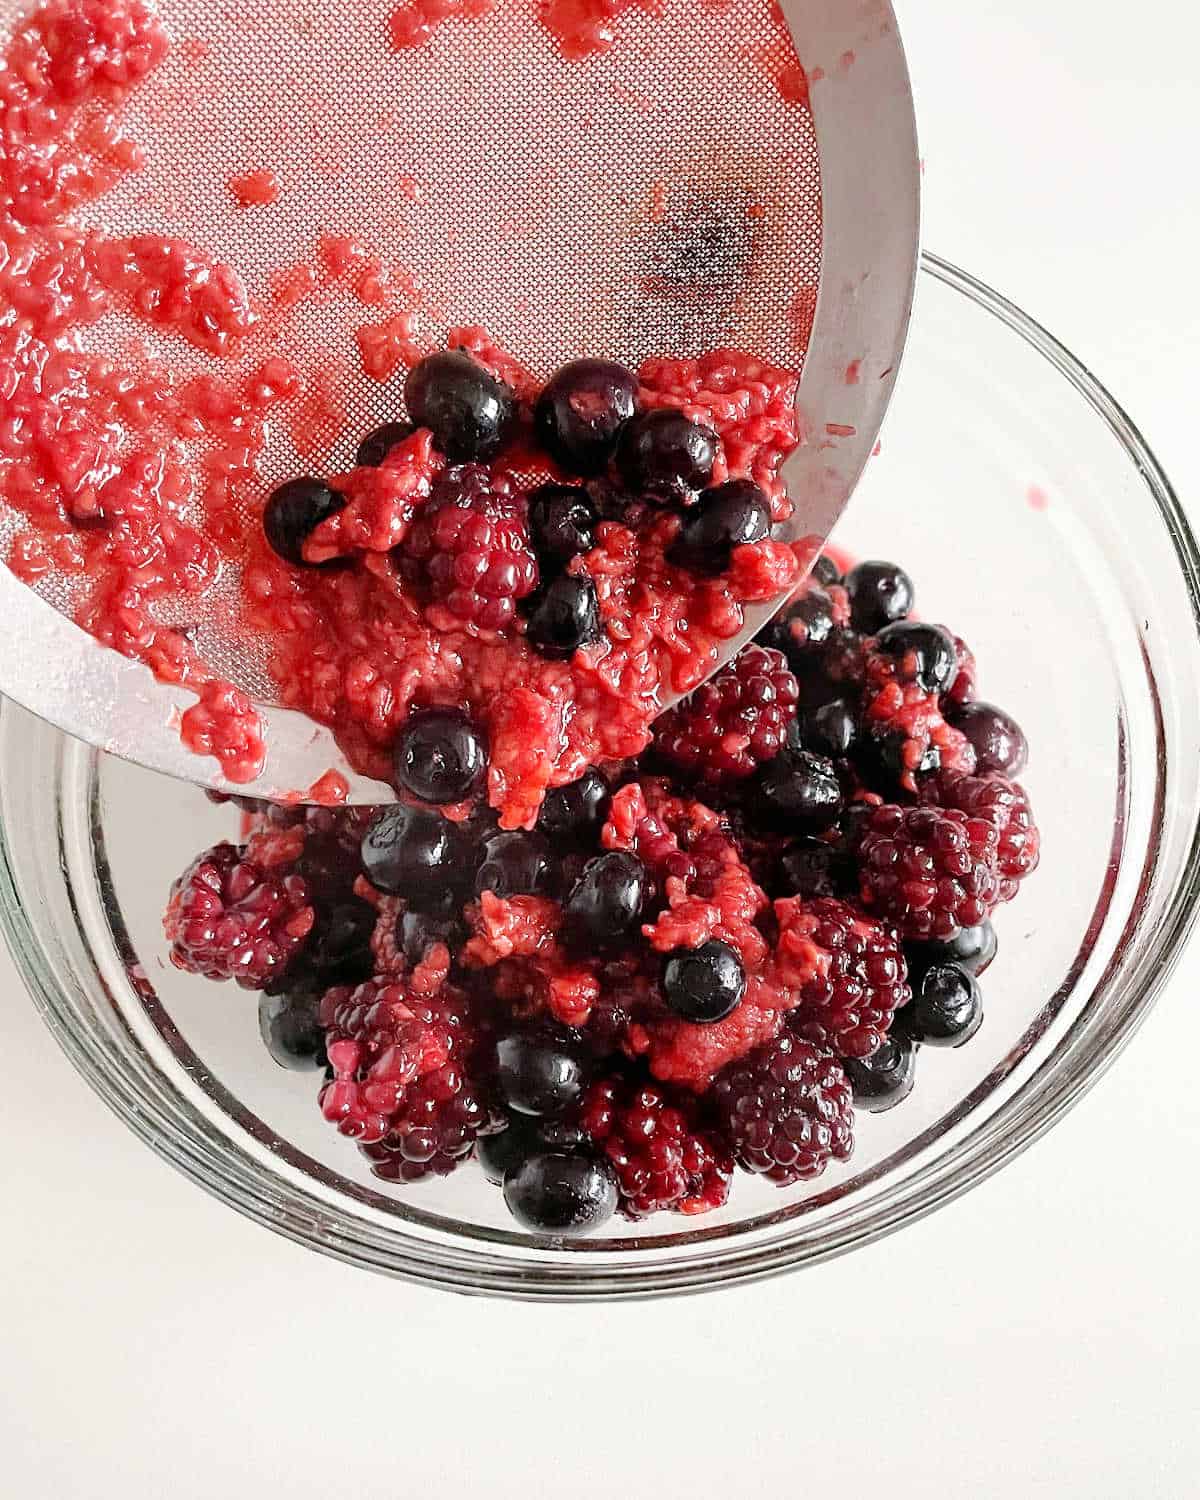 Straining cooked berries into a glass bowl on a white surface.